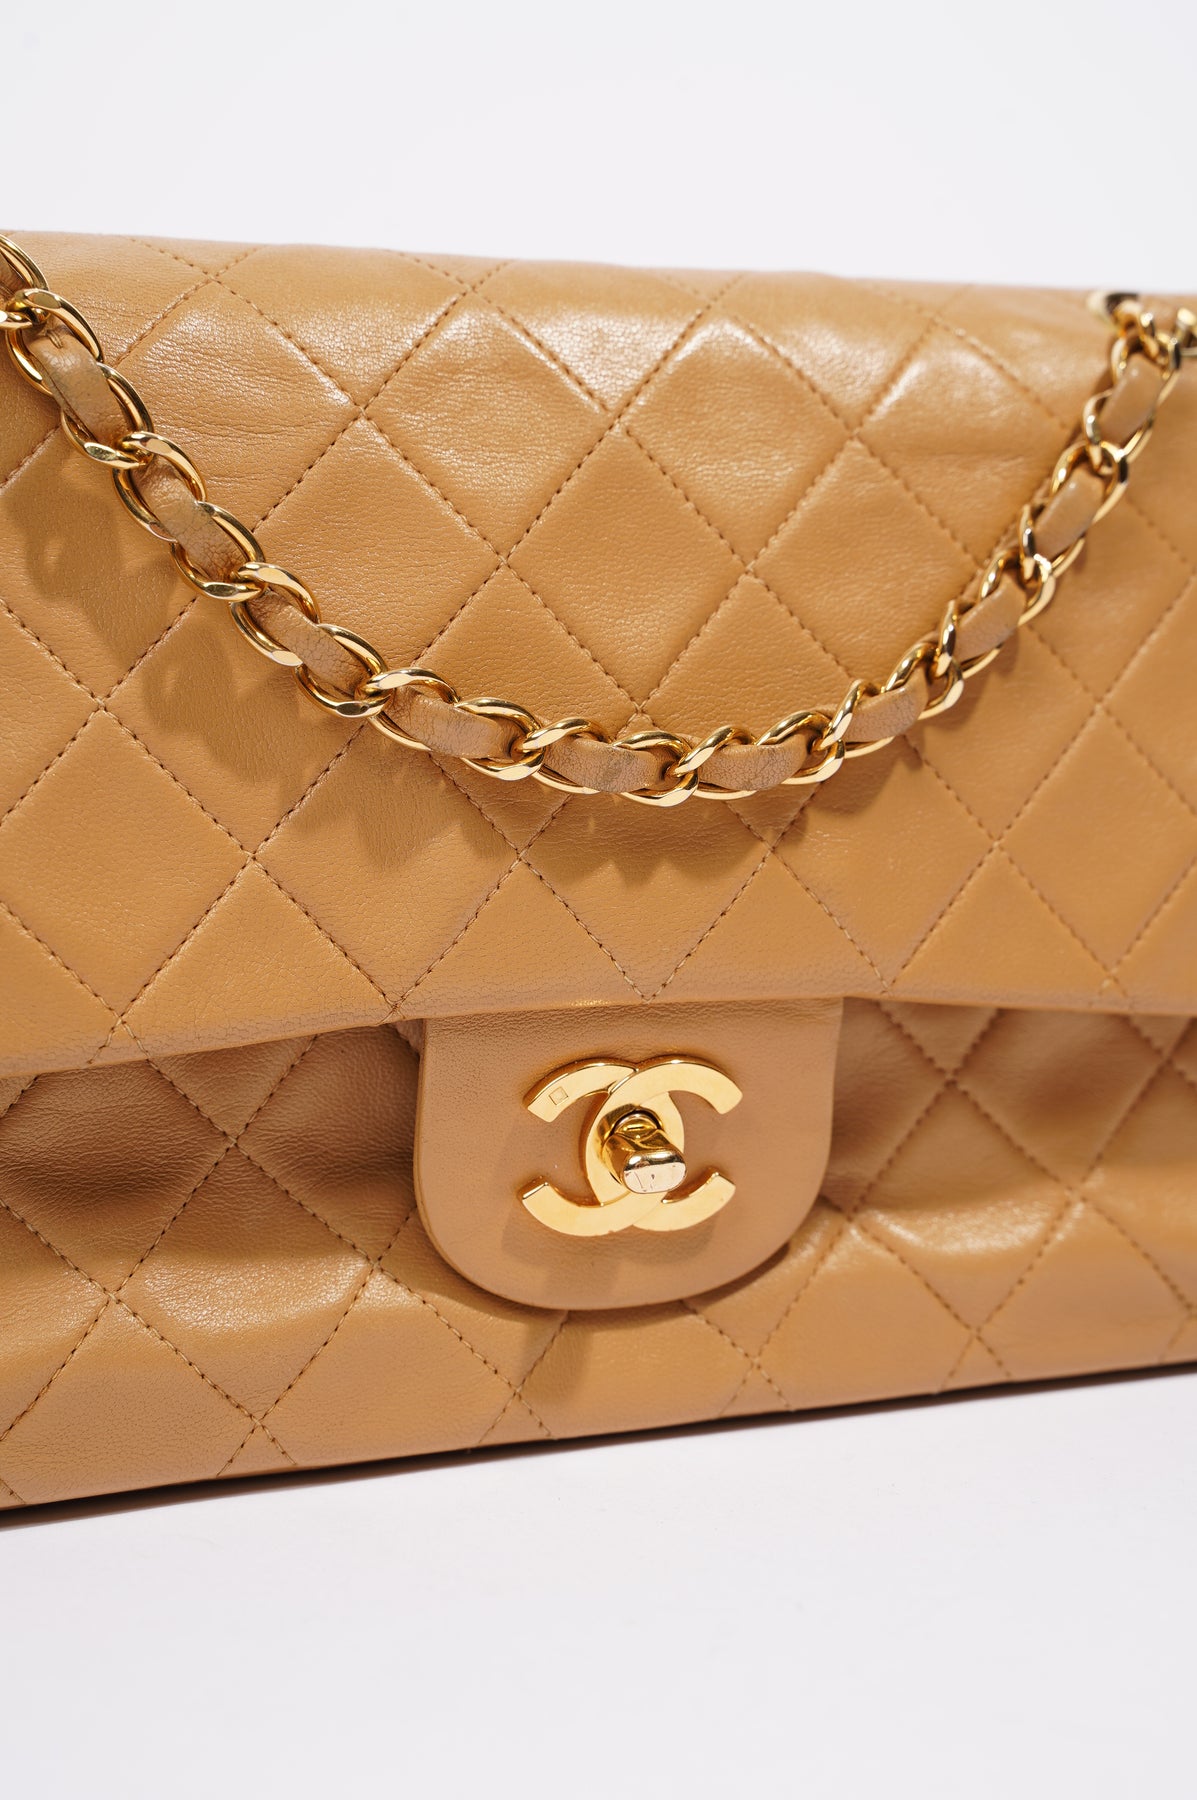 Chanel Beige Quilted Lambskin Double Sided Classic Flap Small Q6B0N91II1005